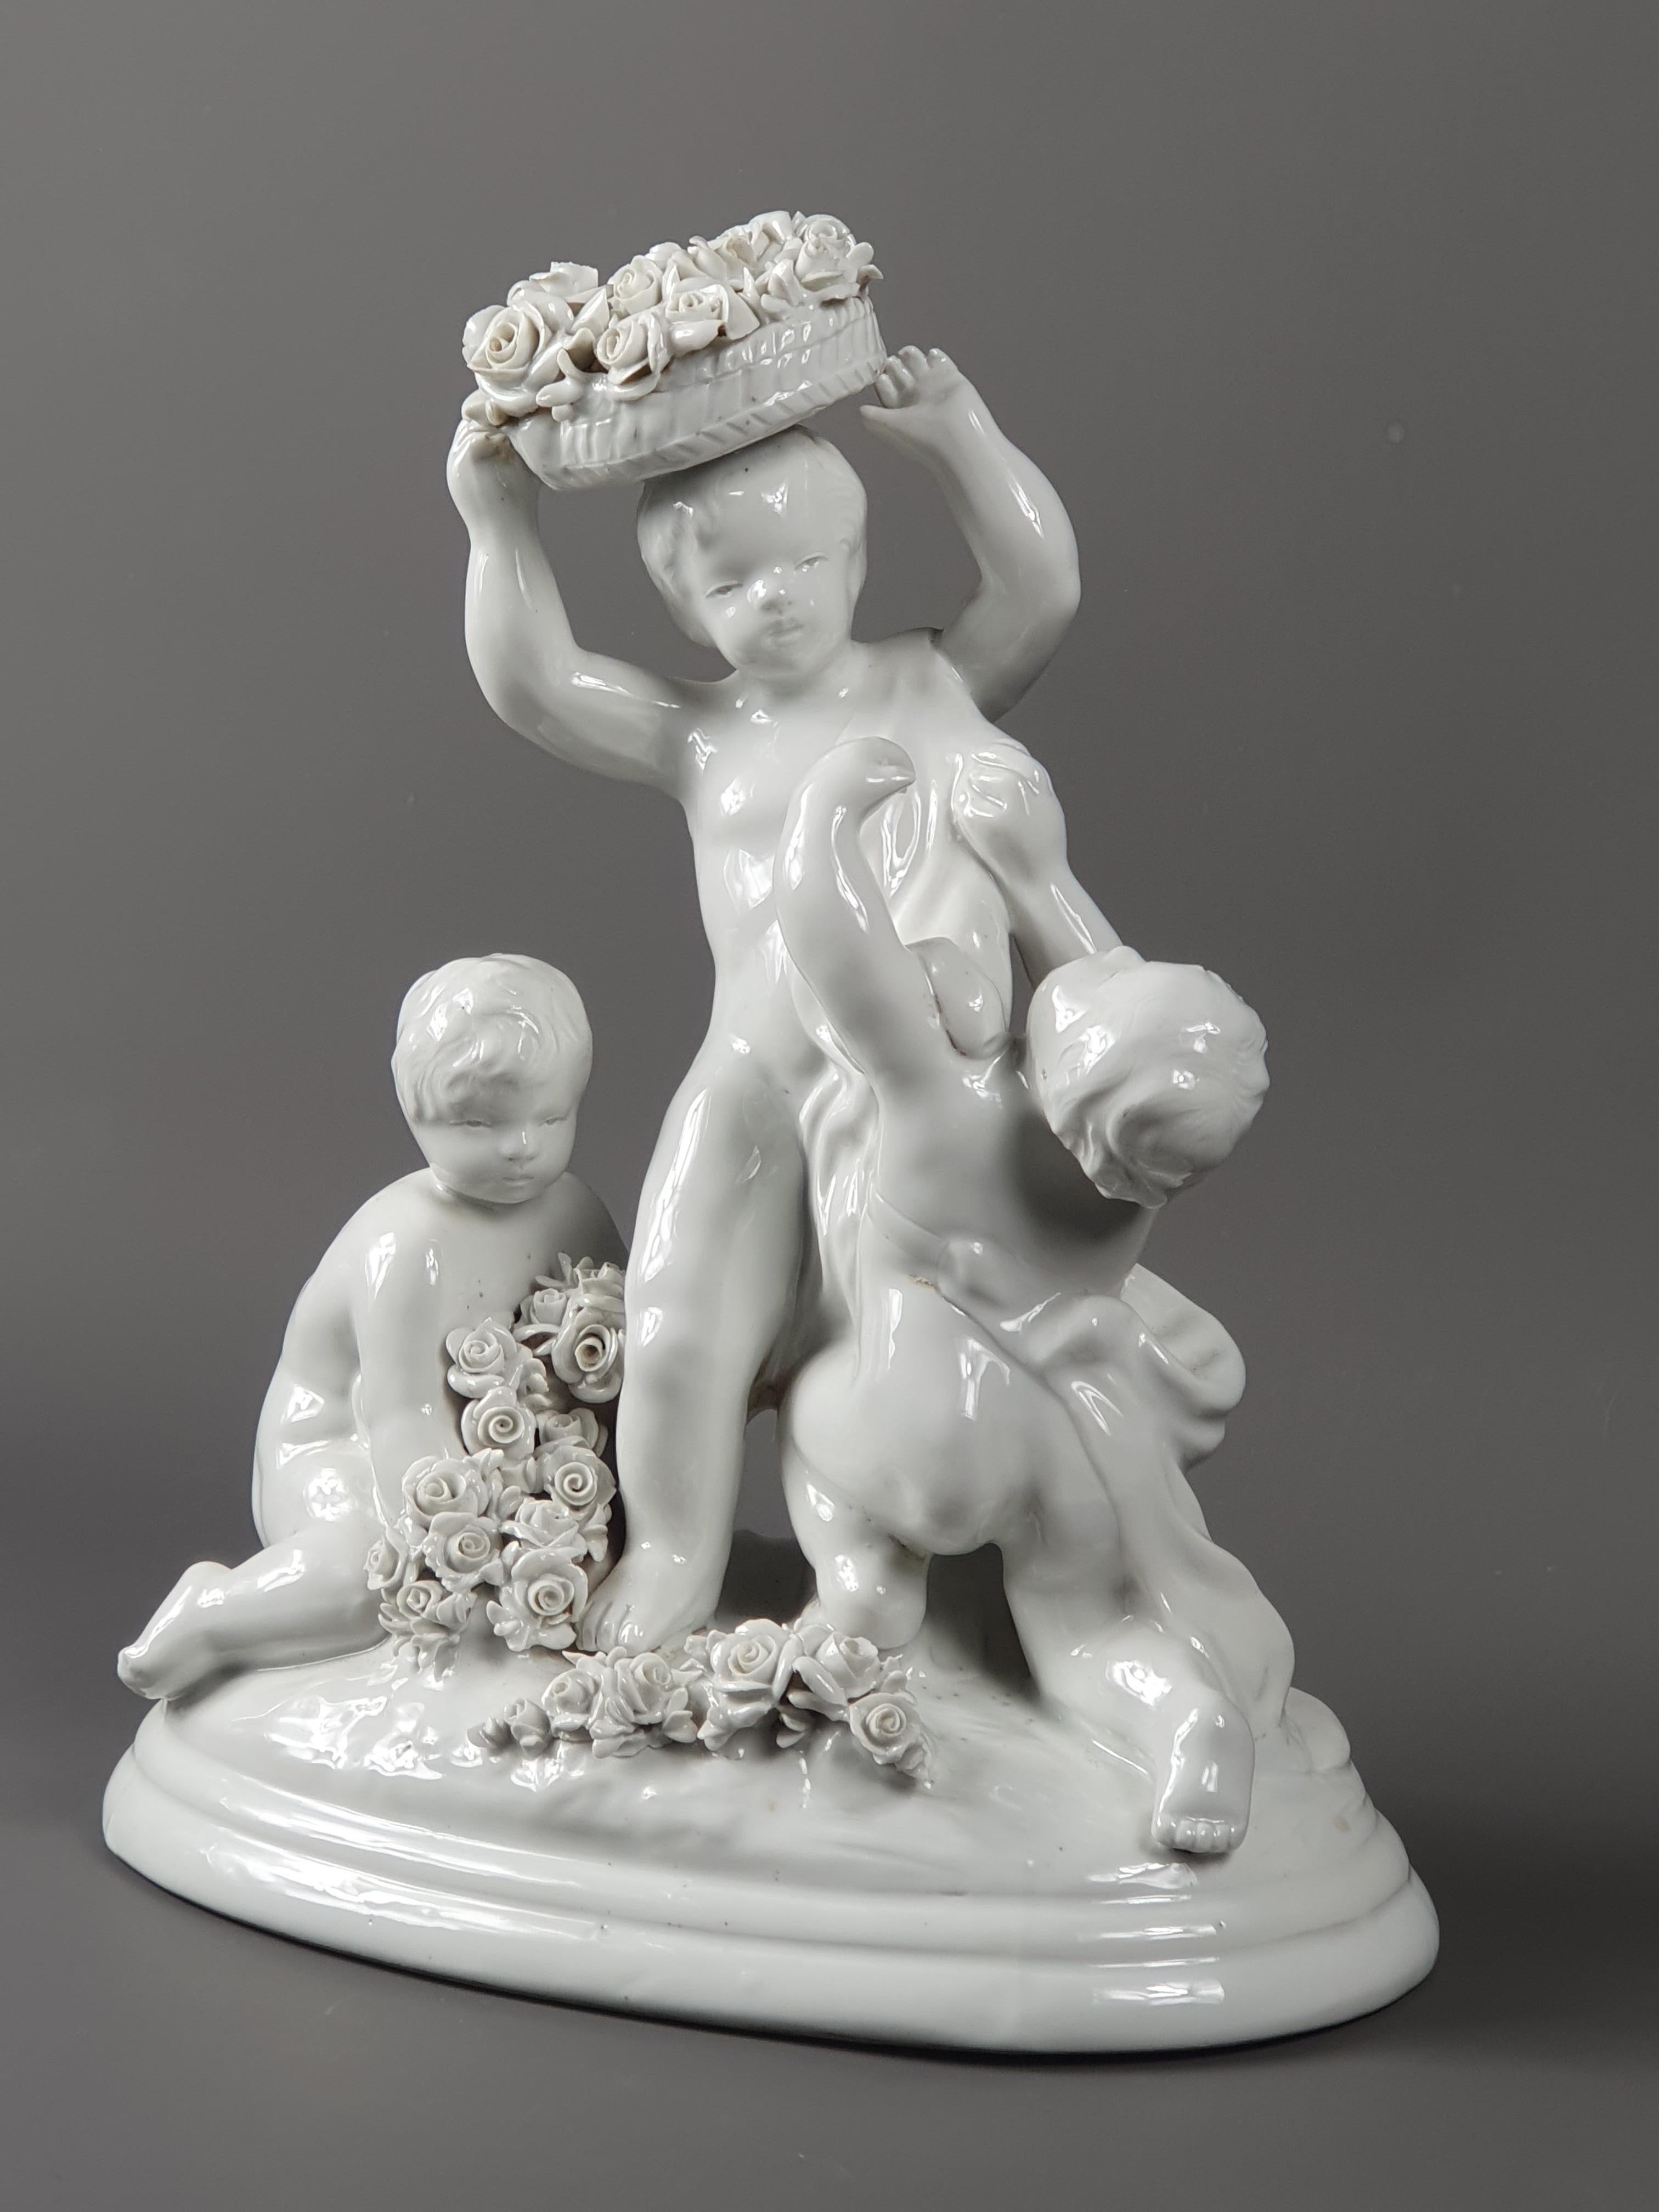 Capodimonte factory in Italy near Naples.

Enamelled porcelain group presenting three putti playing with sheaves of rosebuds, one of them carrying a basket on his head.

Signed L Badessi and stamp of the Capodimonte factory. Late 19th